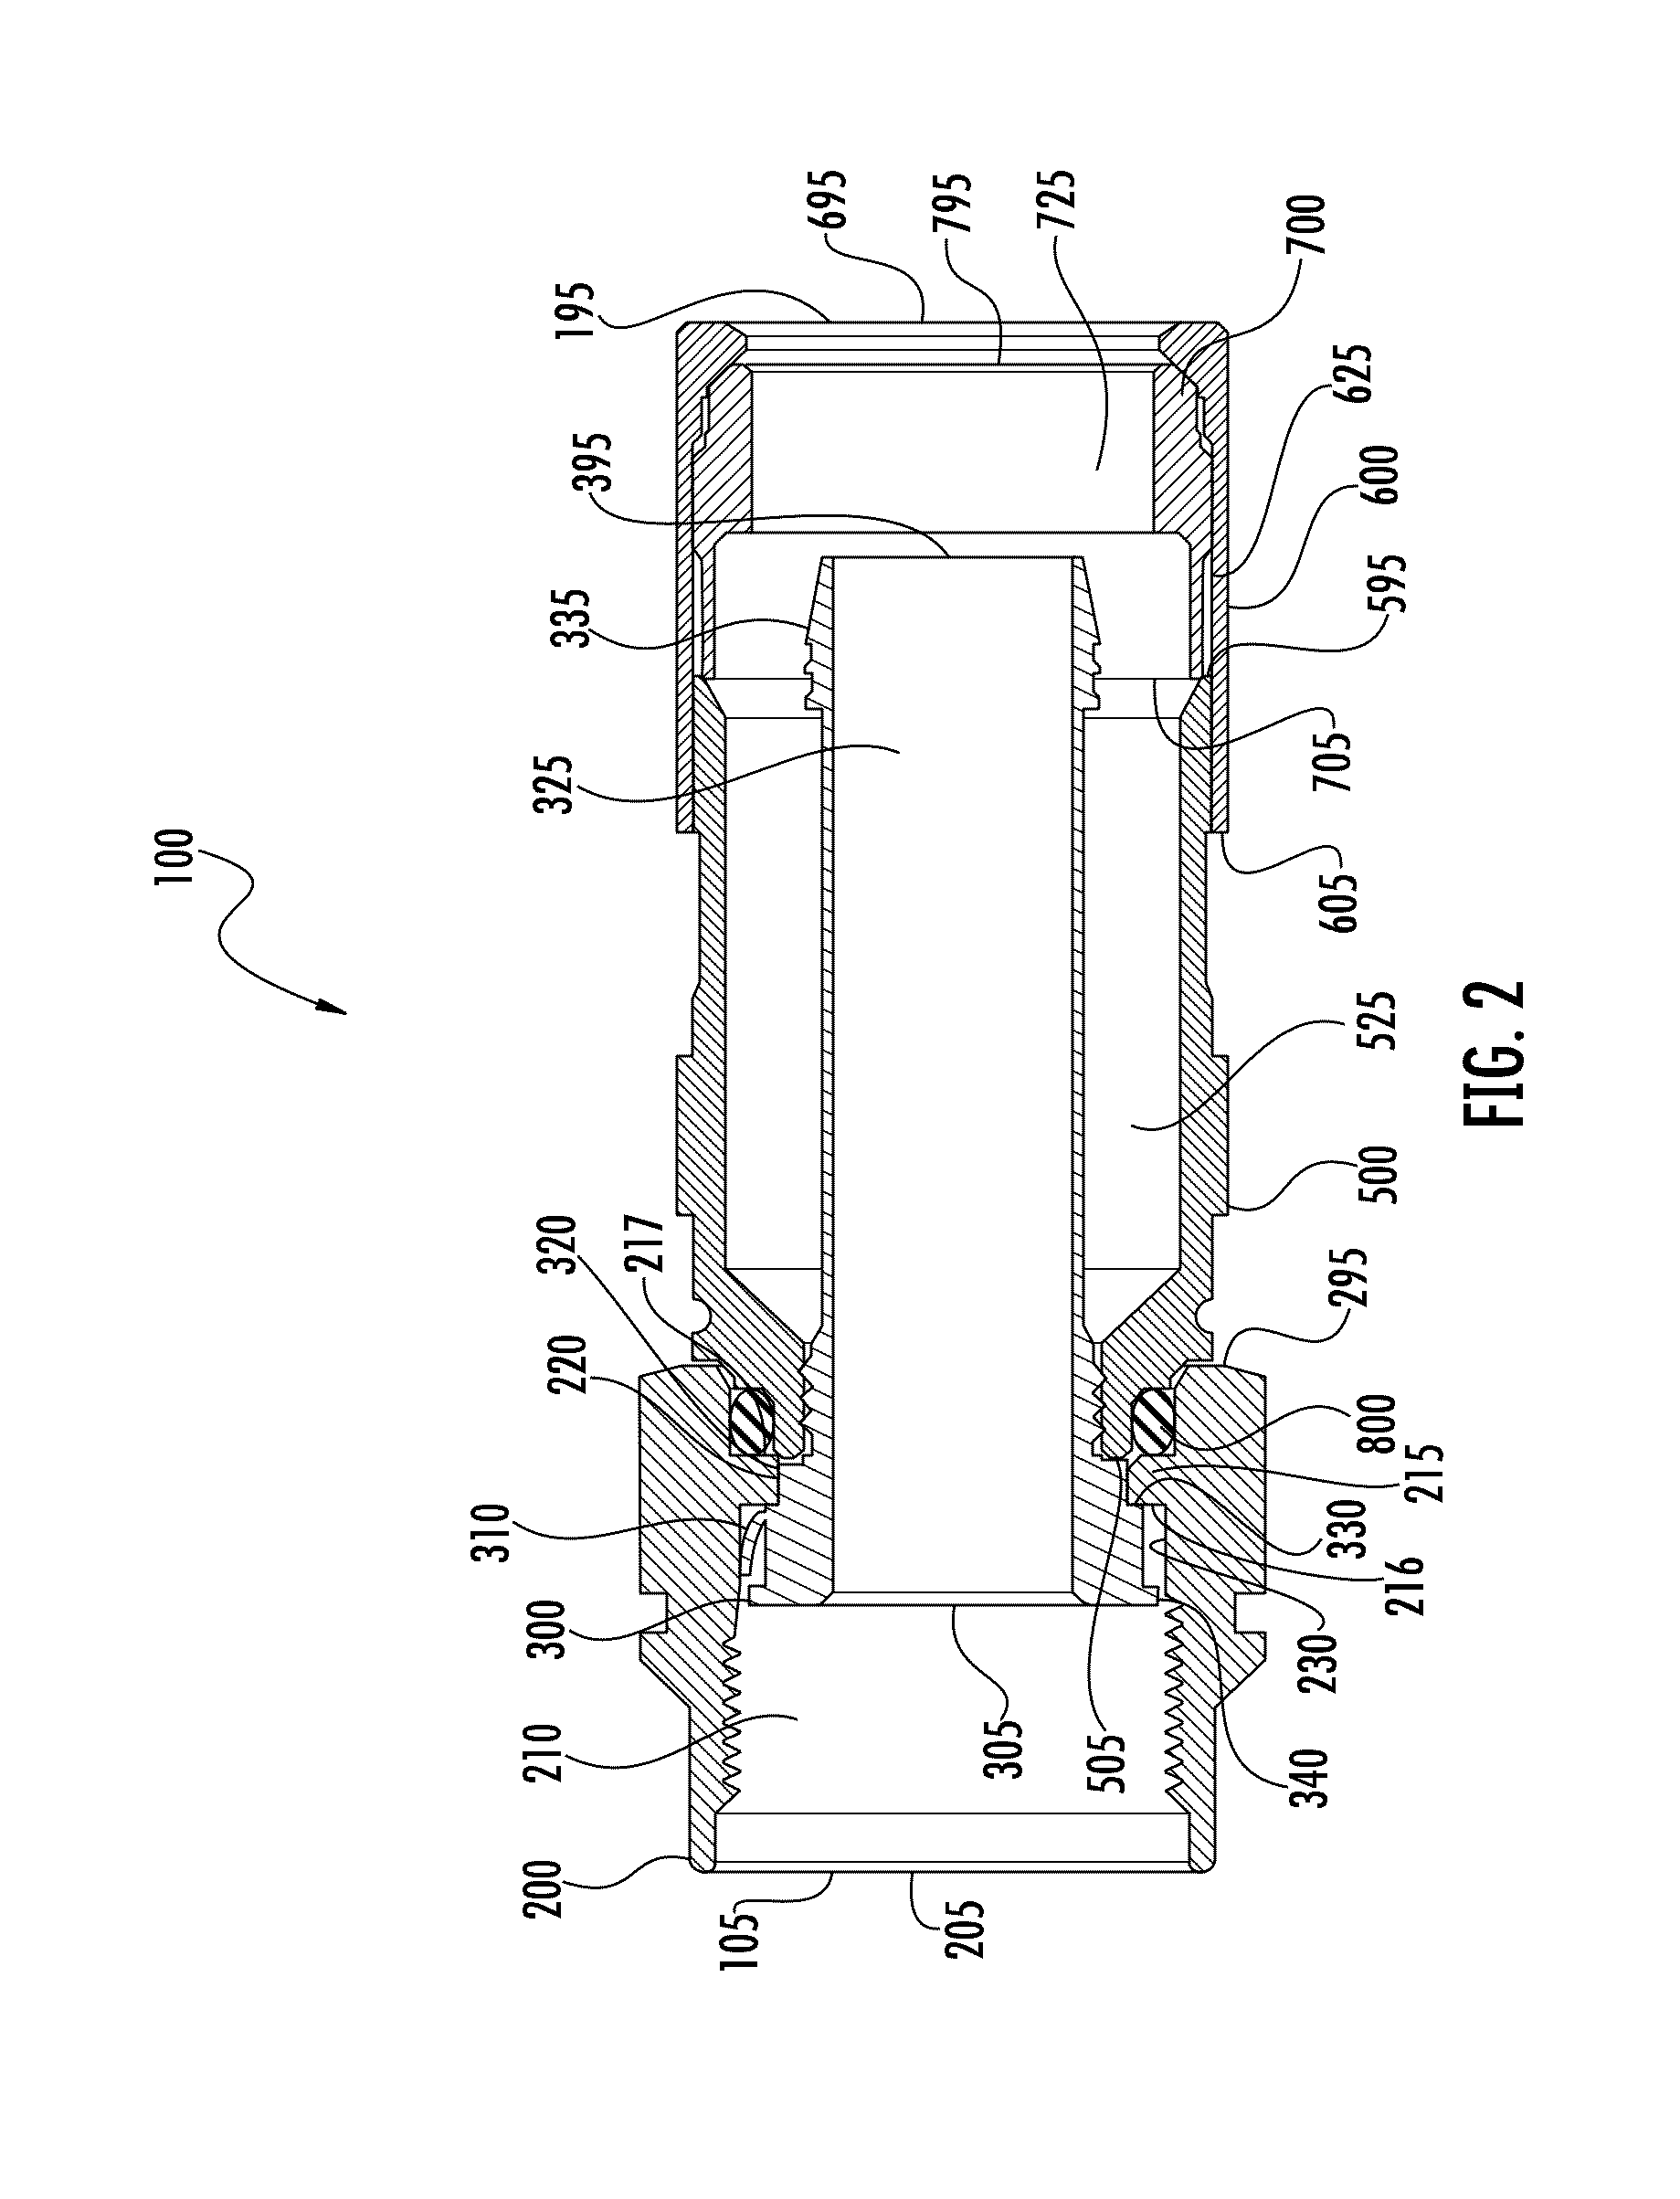 Coaxial cable connector with integral continuity contacting portion